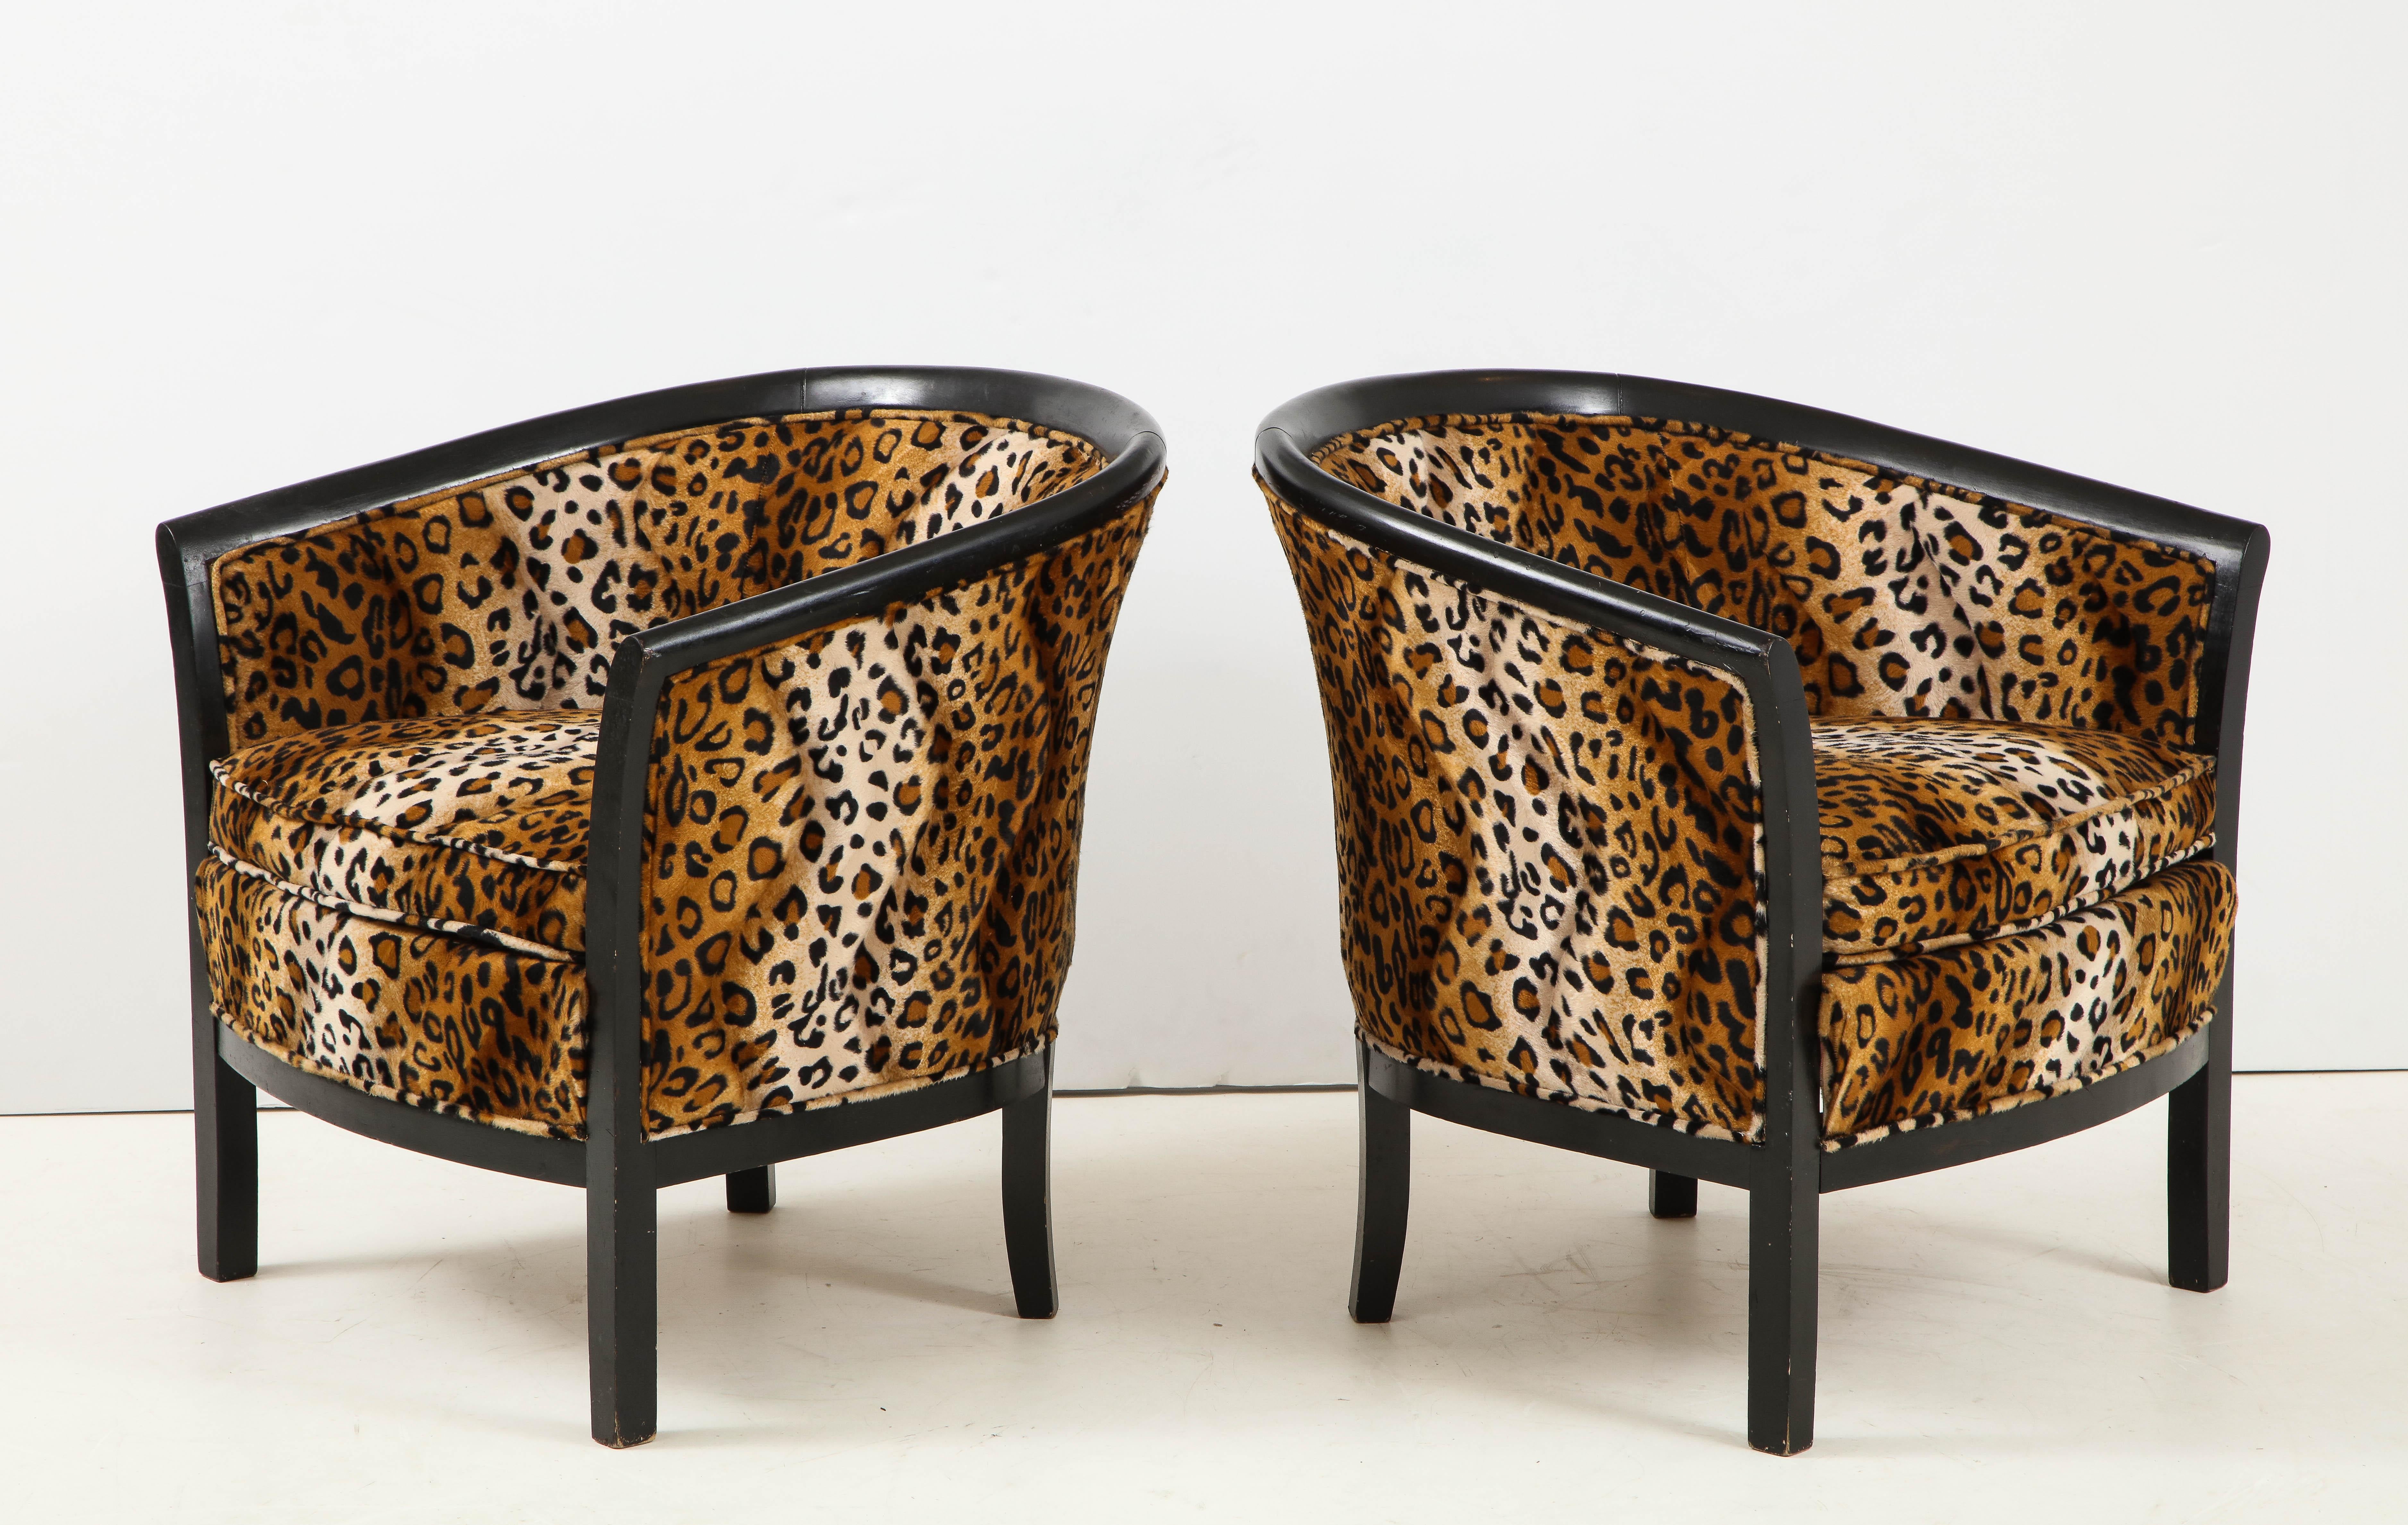 Lacquer Pair of French Chairs with Leopard Fabric